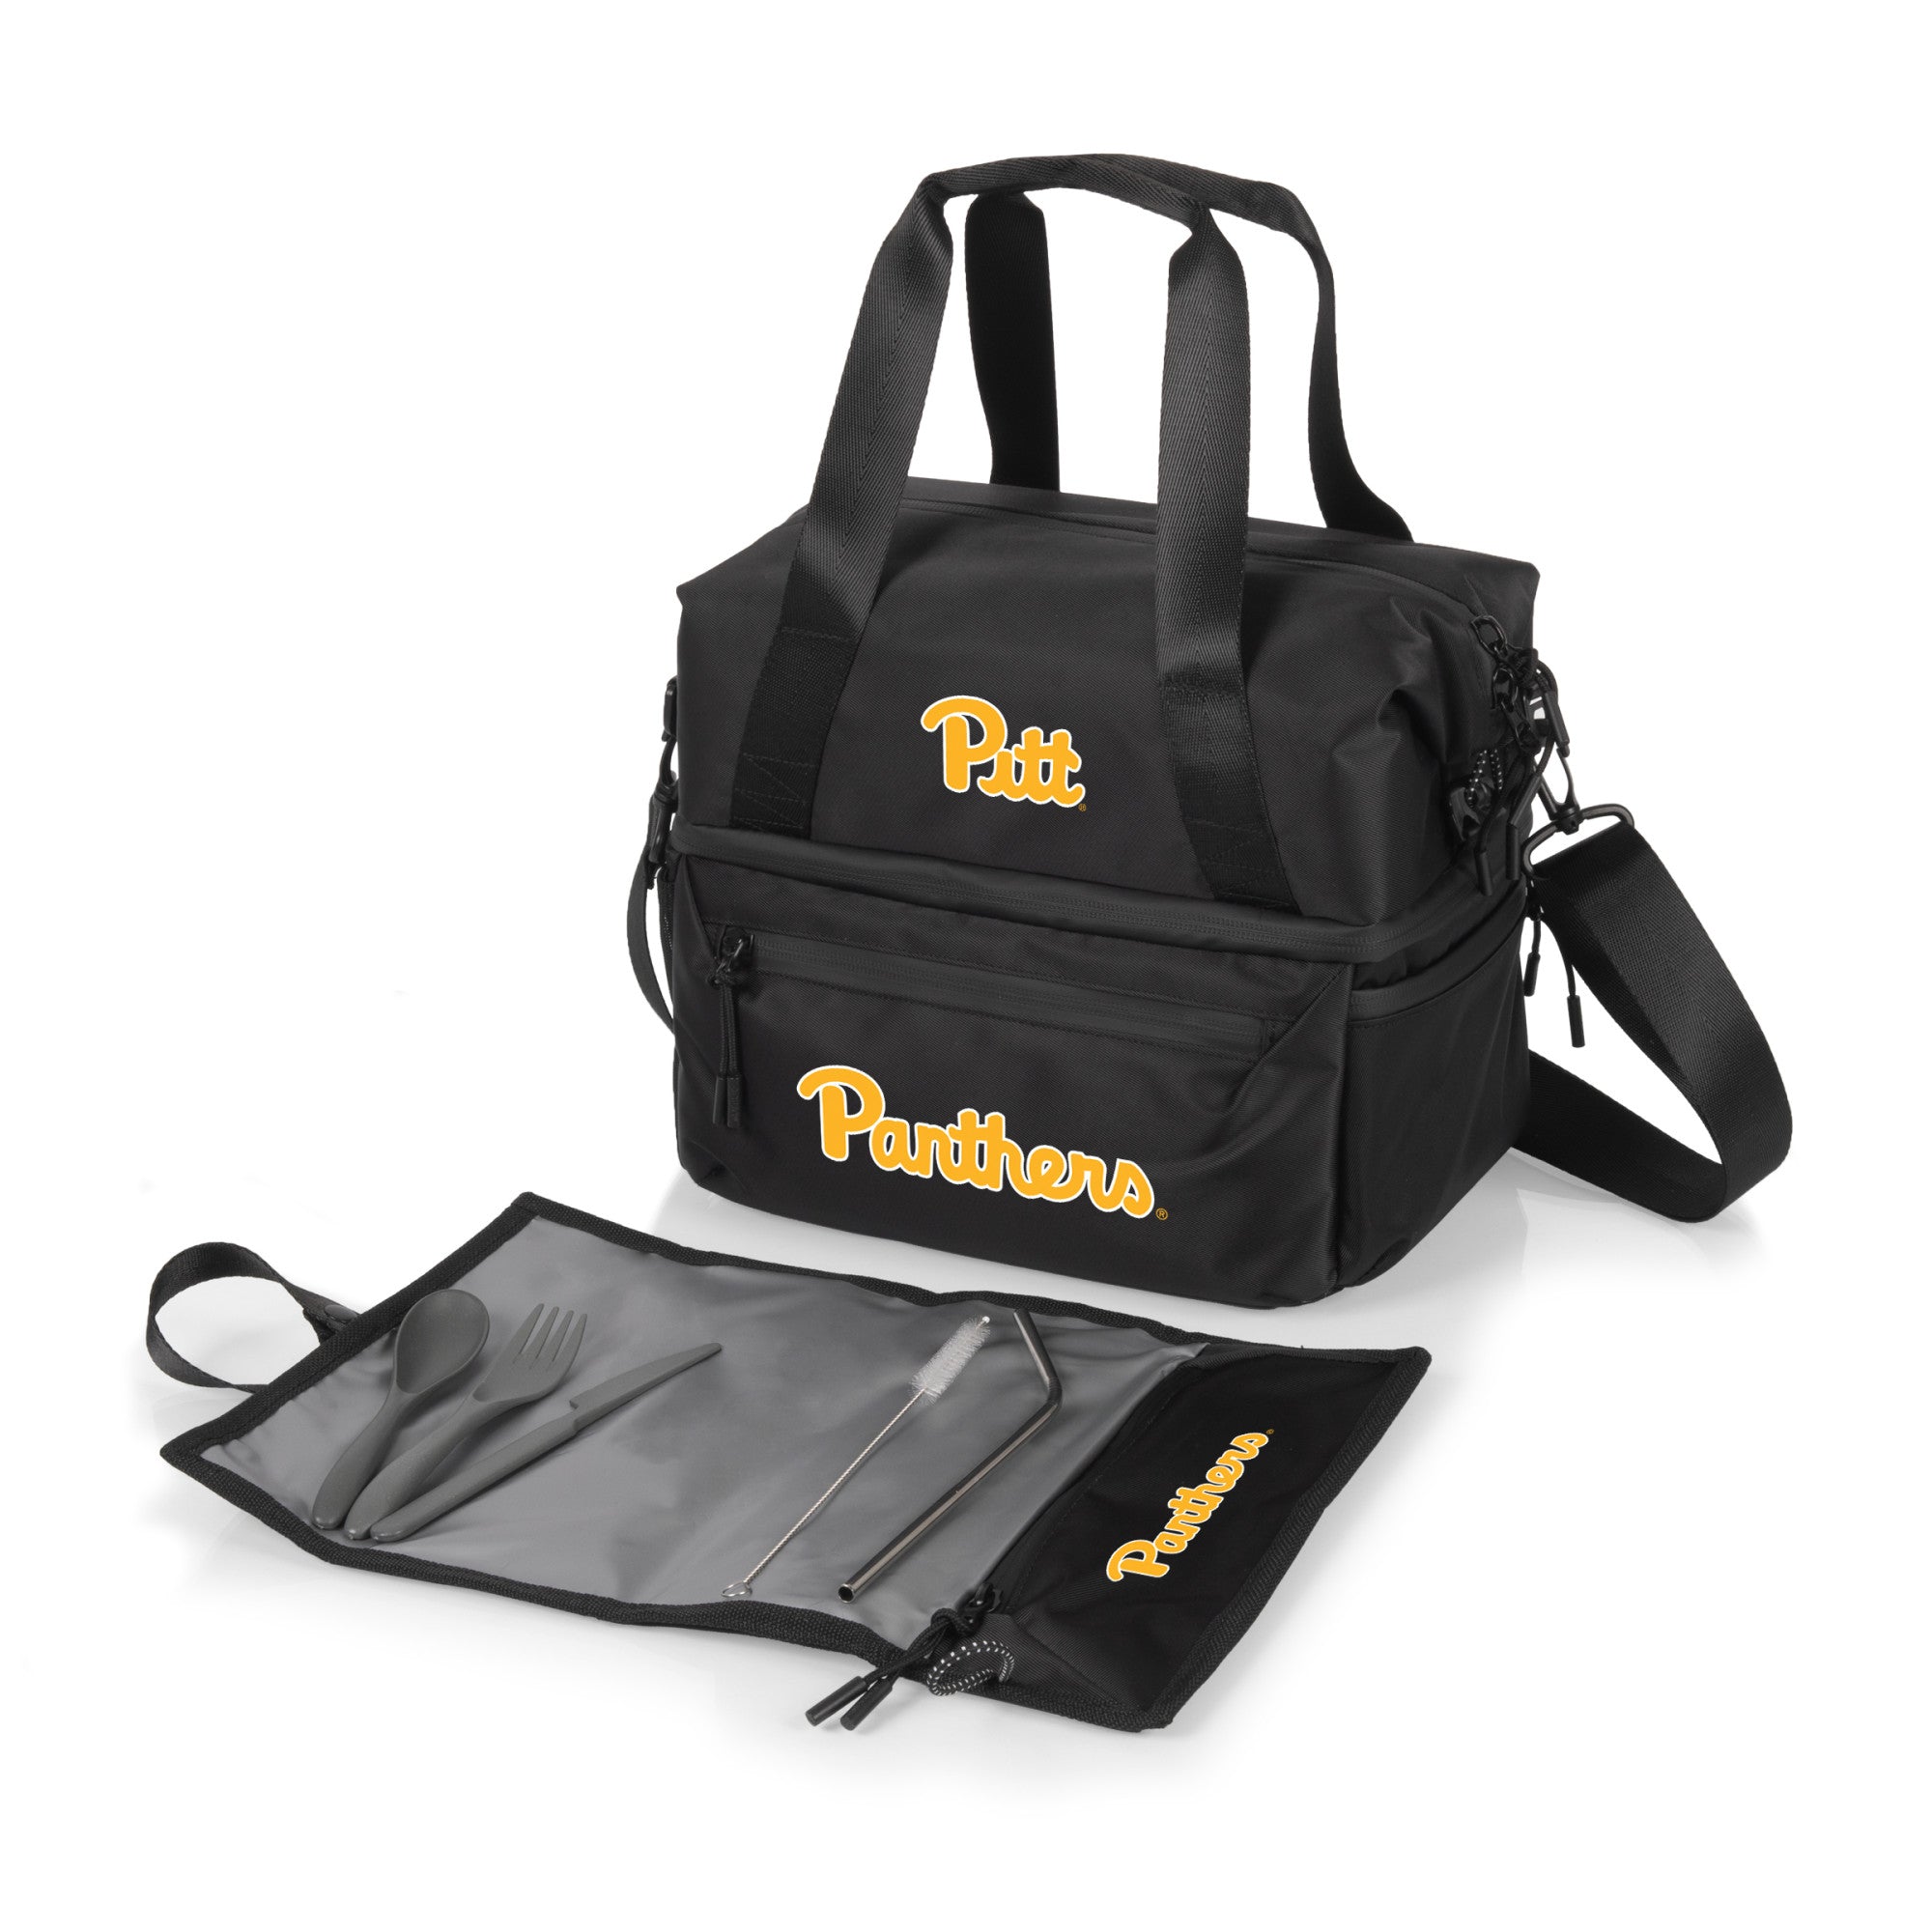 Pittsburgh Panthers - Tarana Lunch Bag Cooler with Utensils